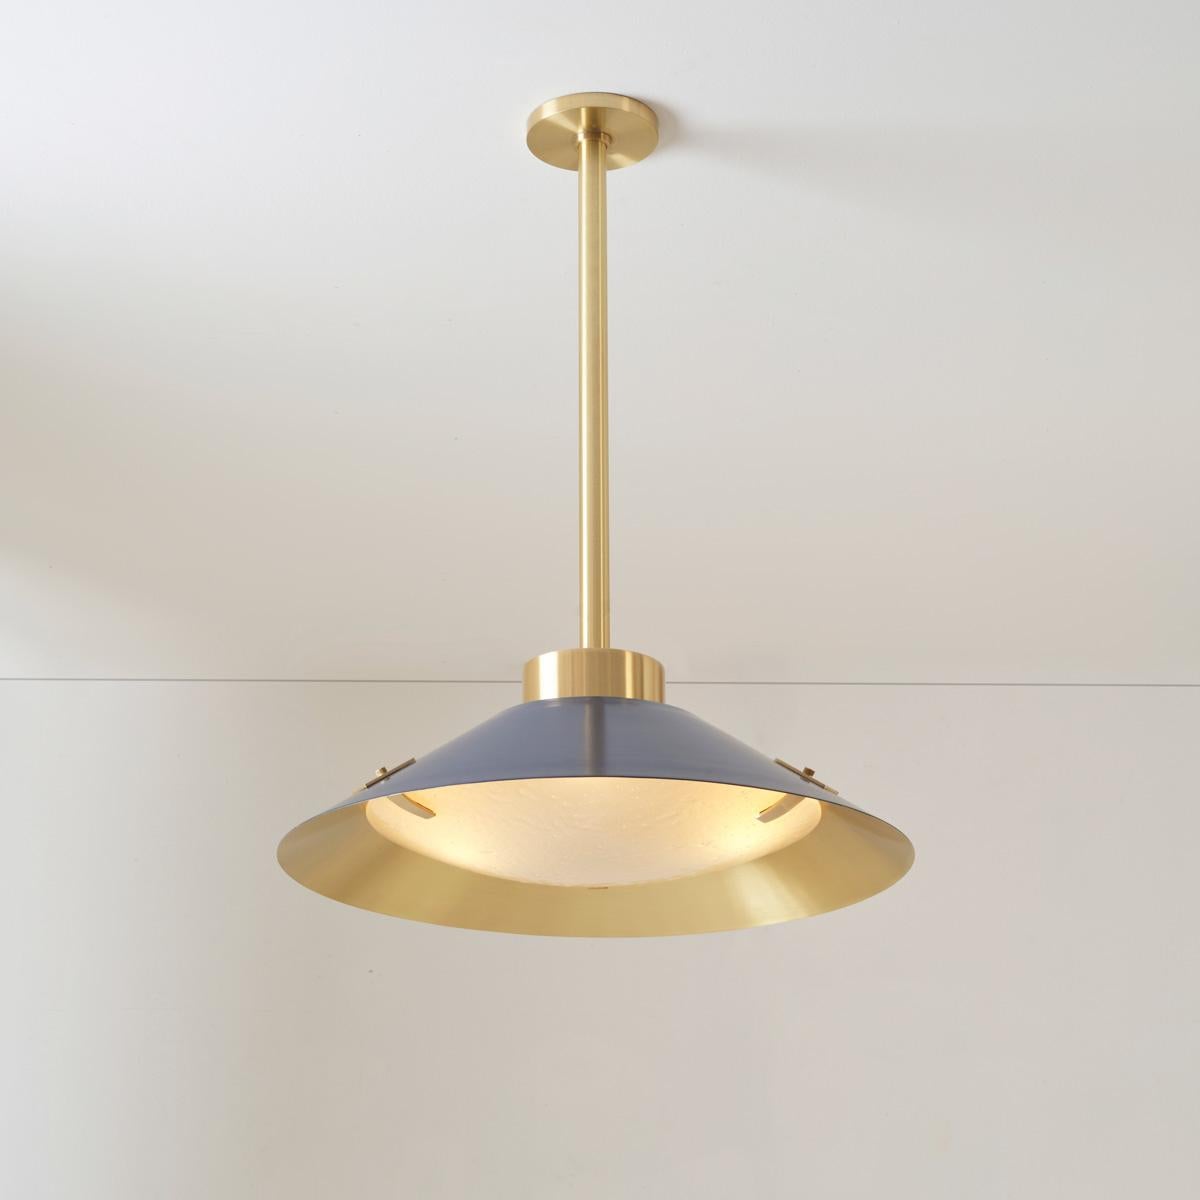 Kono Pendant by Gaspare Asaro. Satin Brass and Sand White For Sale 3